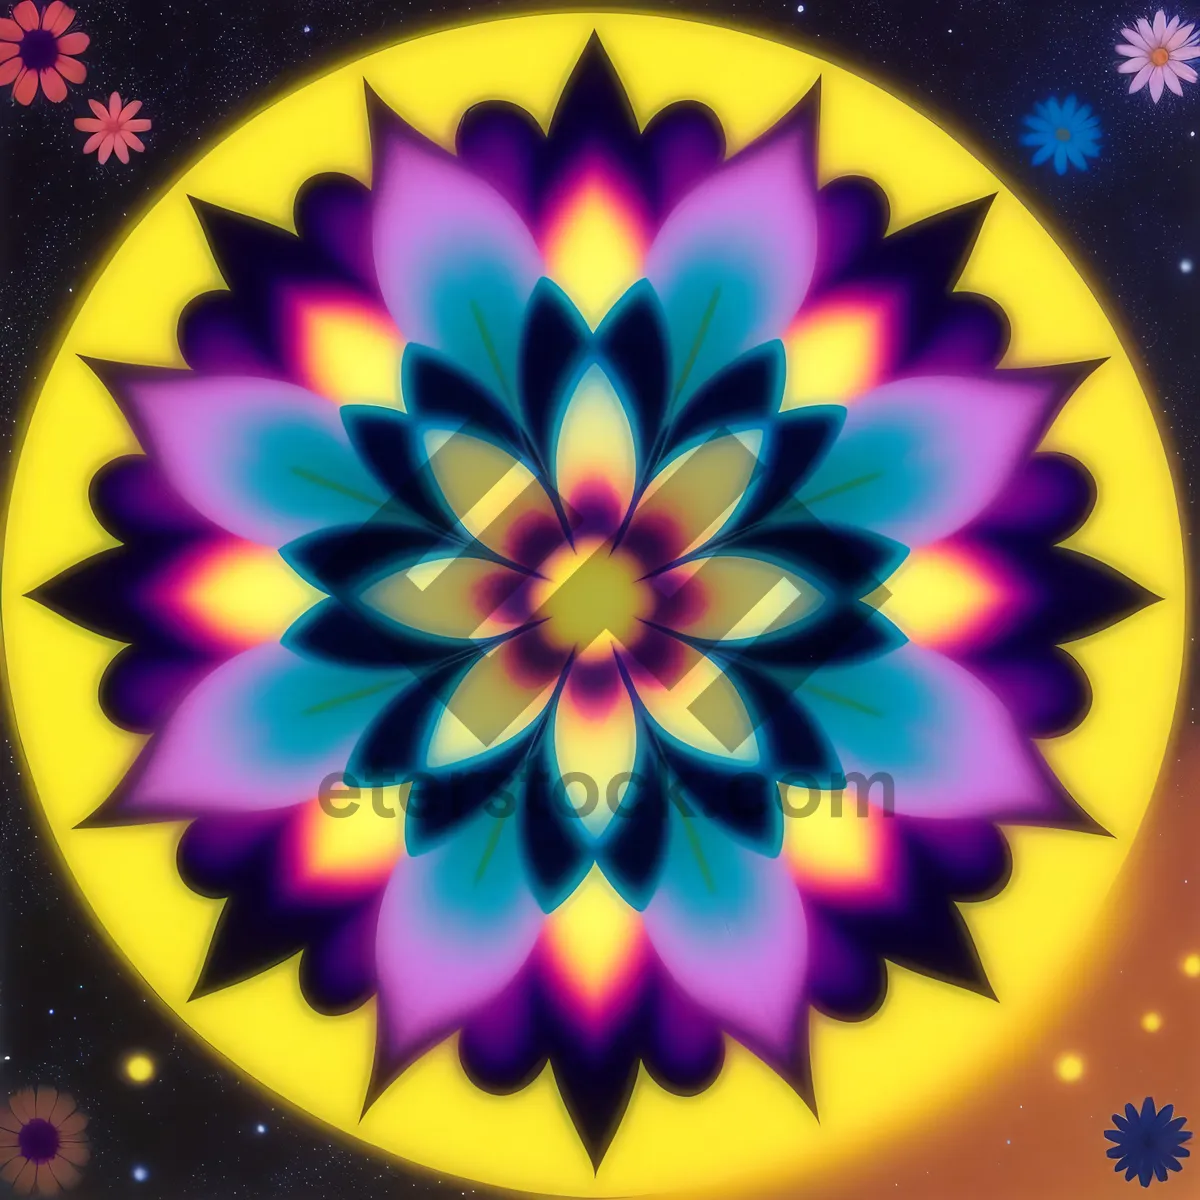 Picture of Vibrant Healing Starburst: Colorful Cosmic Design